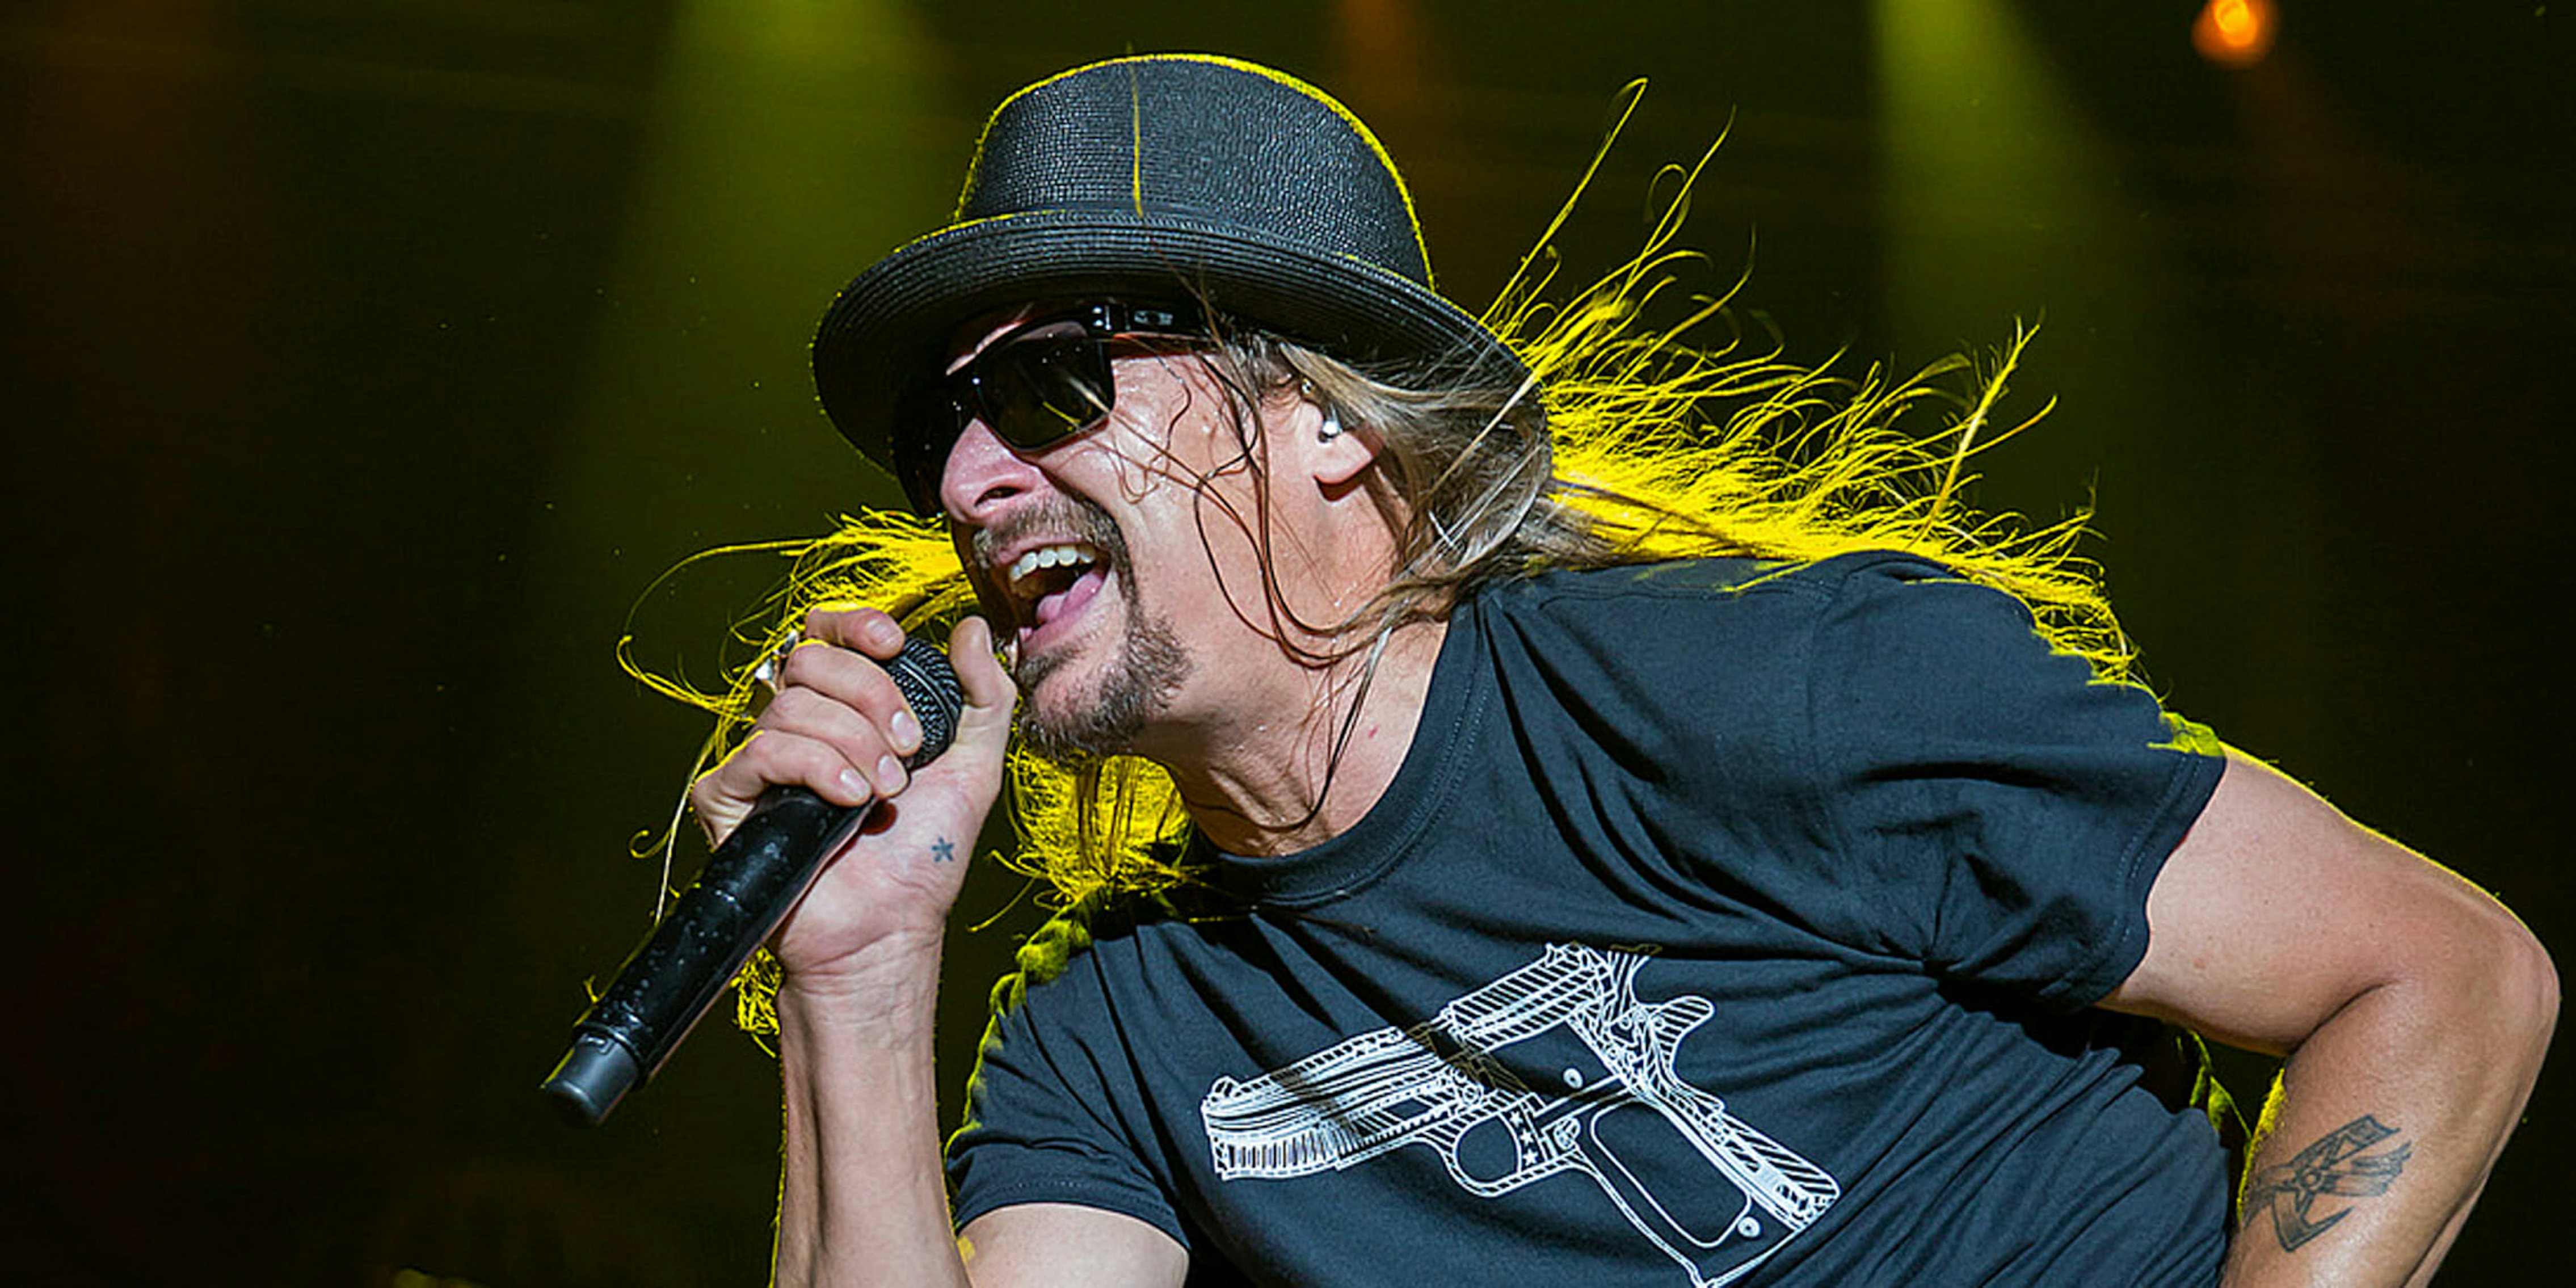 Bob Ritchie, a.k.a Kid Rock, went on a profanity-laden rant about politics during a warm-up show ahead of a concert run in Detroit, according to reports.